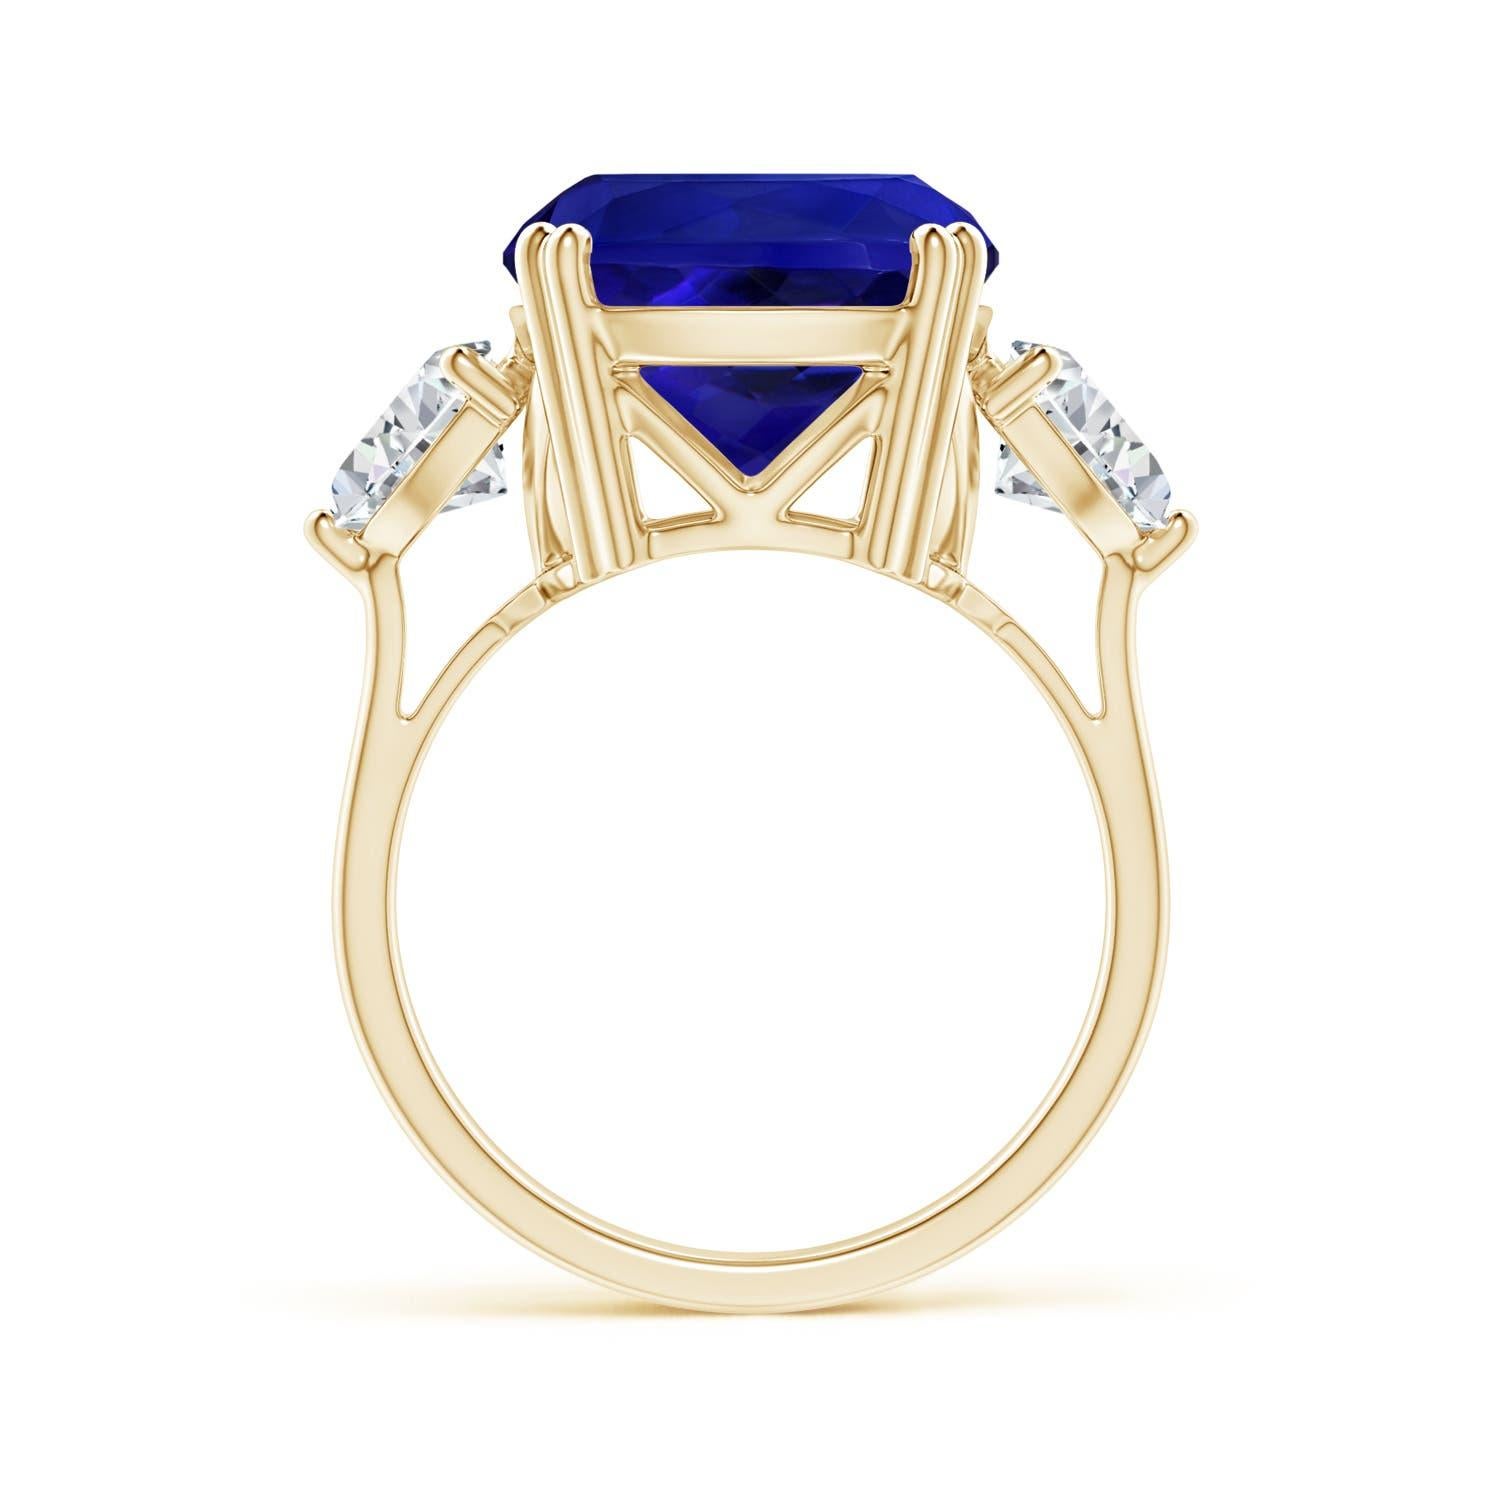 For Sale:  Flanked by Sparkling Trillion Diamonds Is a GIA Certified Cushion Tanzanite Held 2